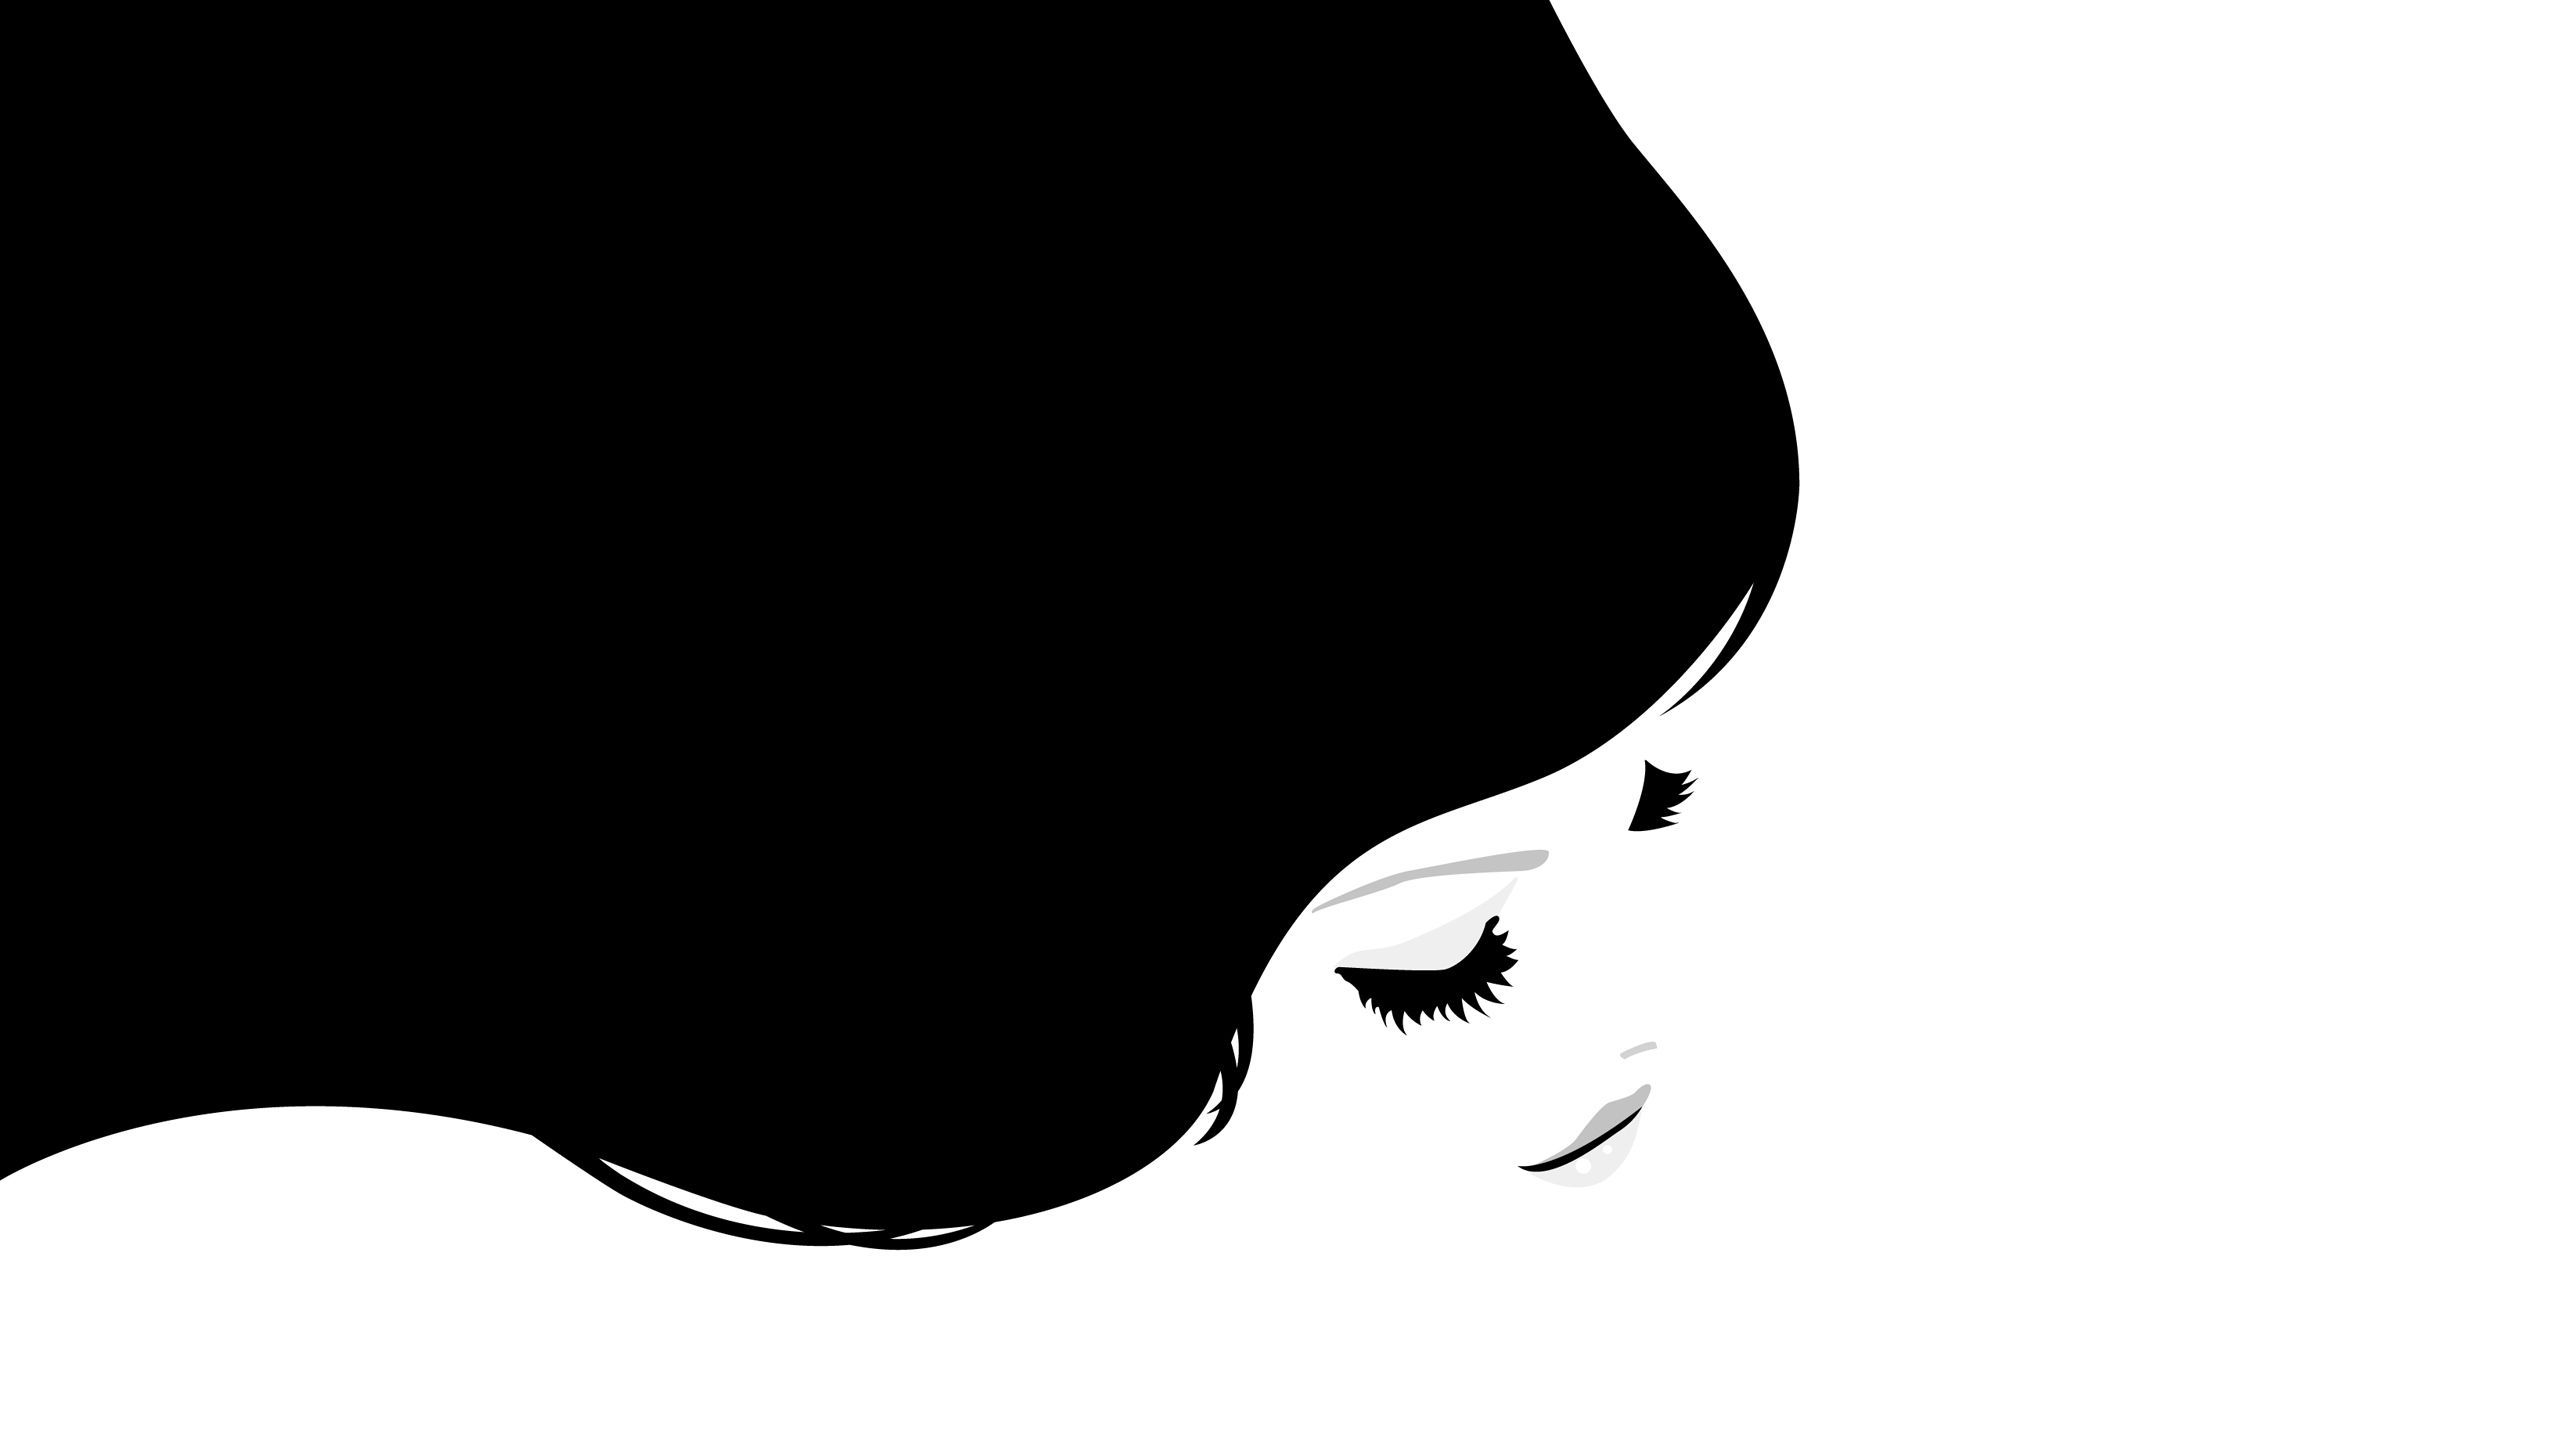 Hairstyle Girl Picture Image Clip Art Black And White Wallpaper